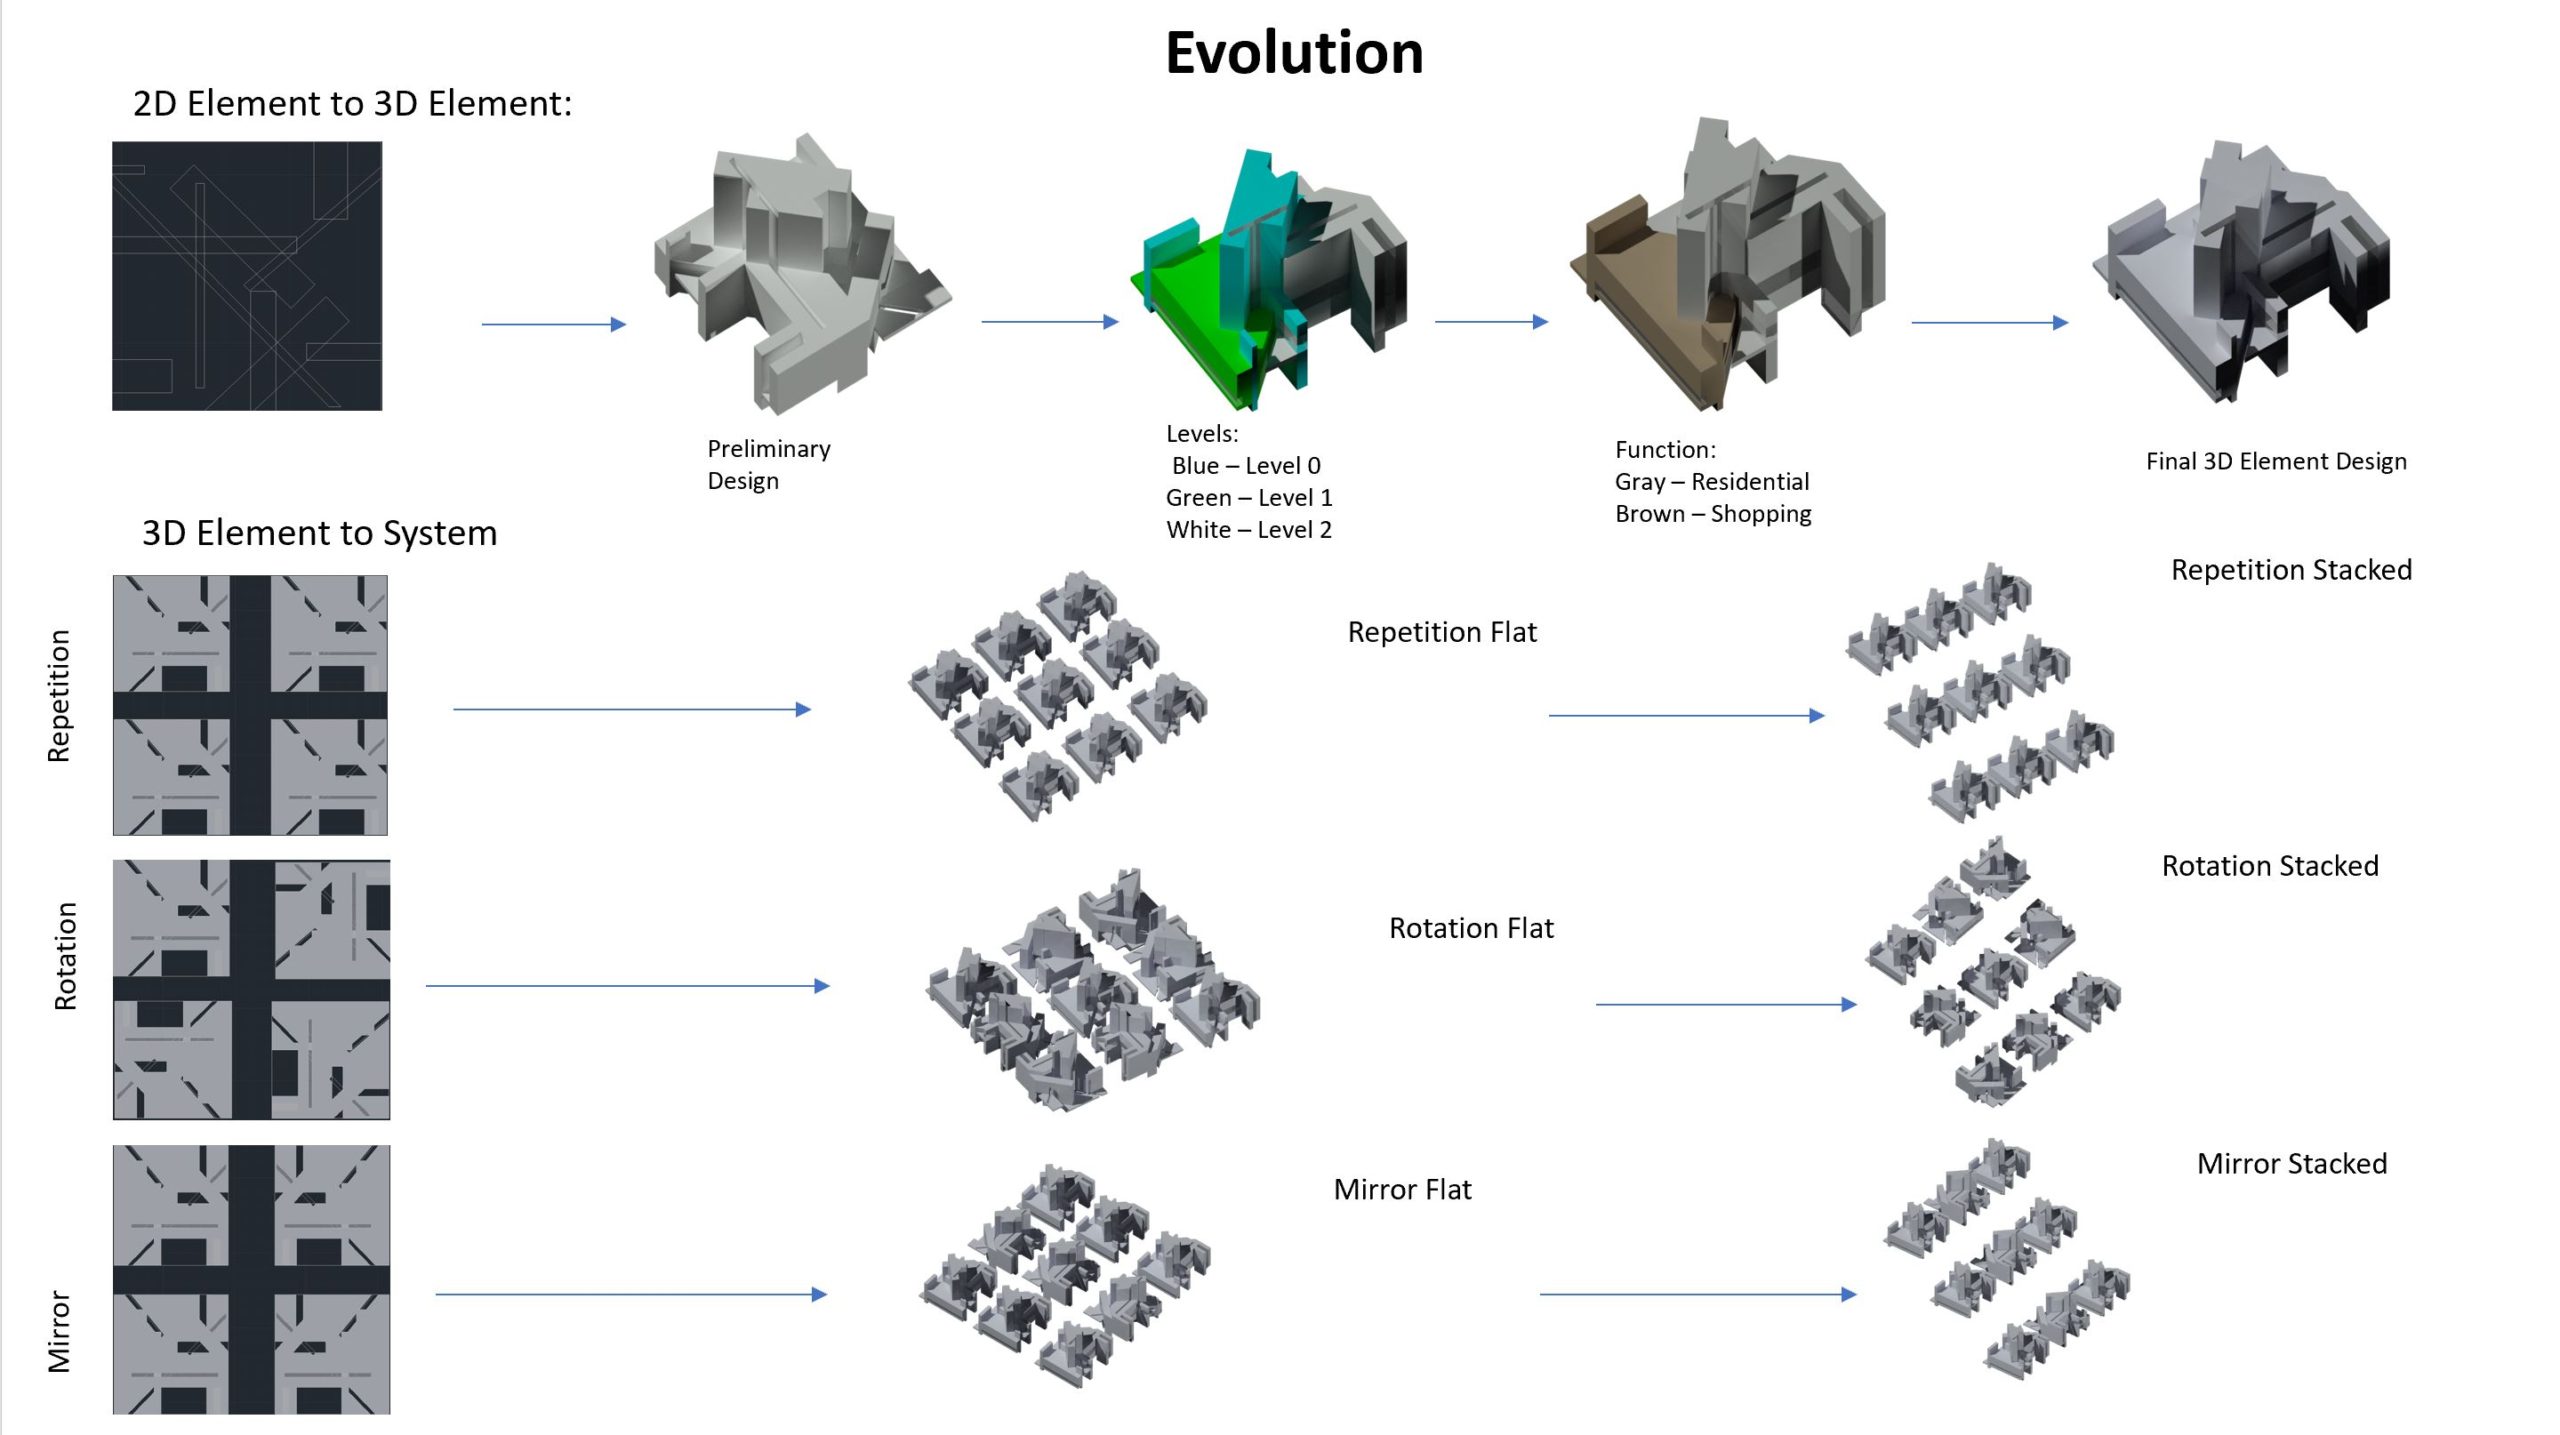 Evolution: From 2D Element to 3D Element to System